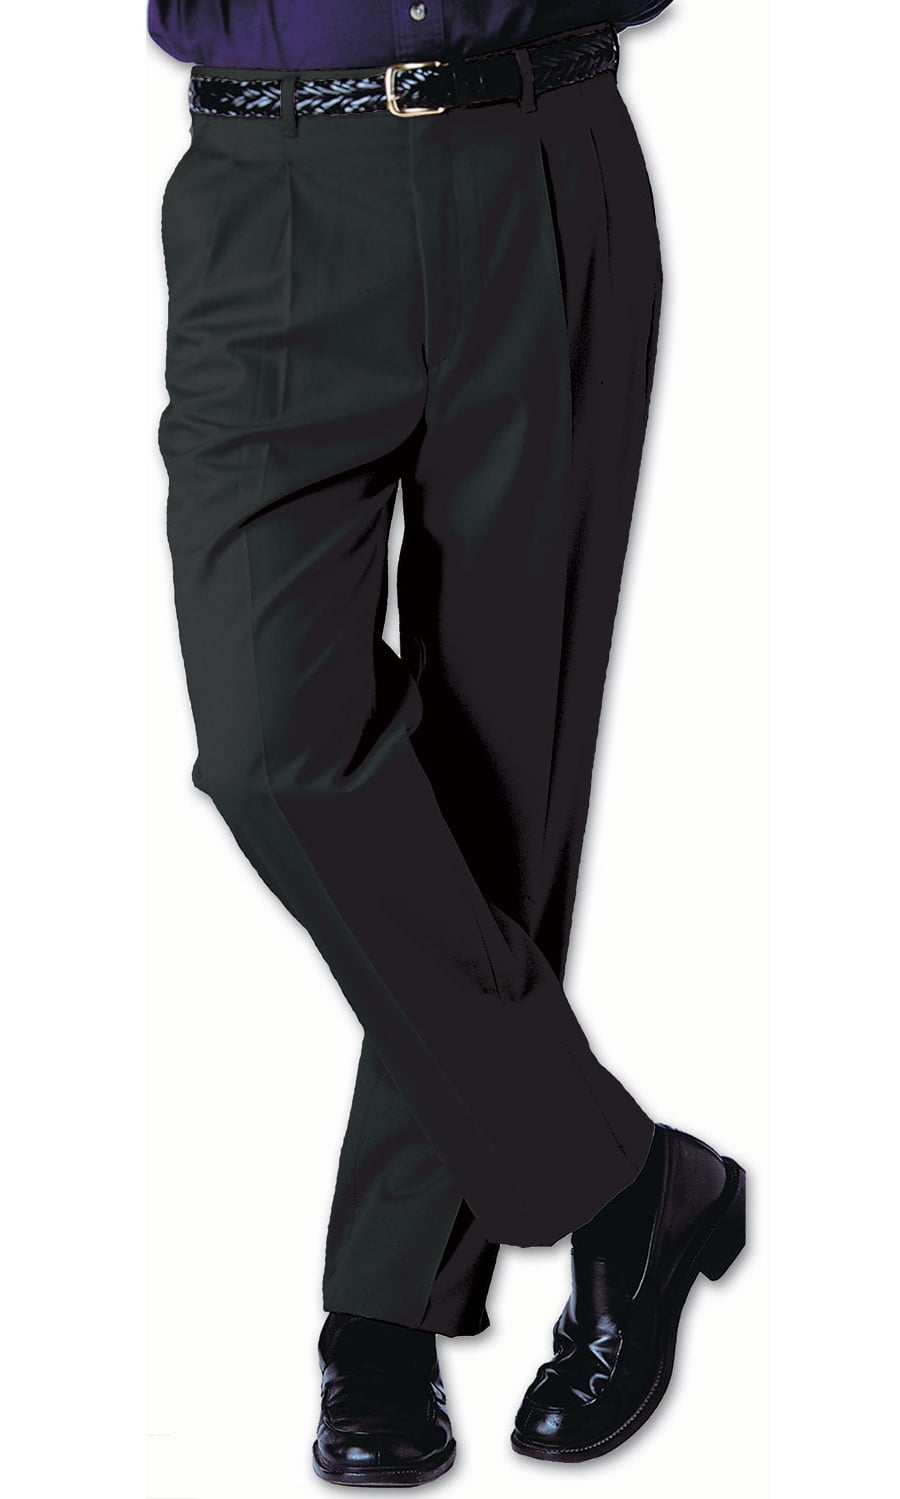 Edwards Garment Mens Casual Chino Blend Easy Fit Pant_BLACK_54 UL